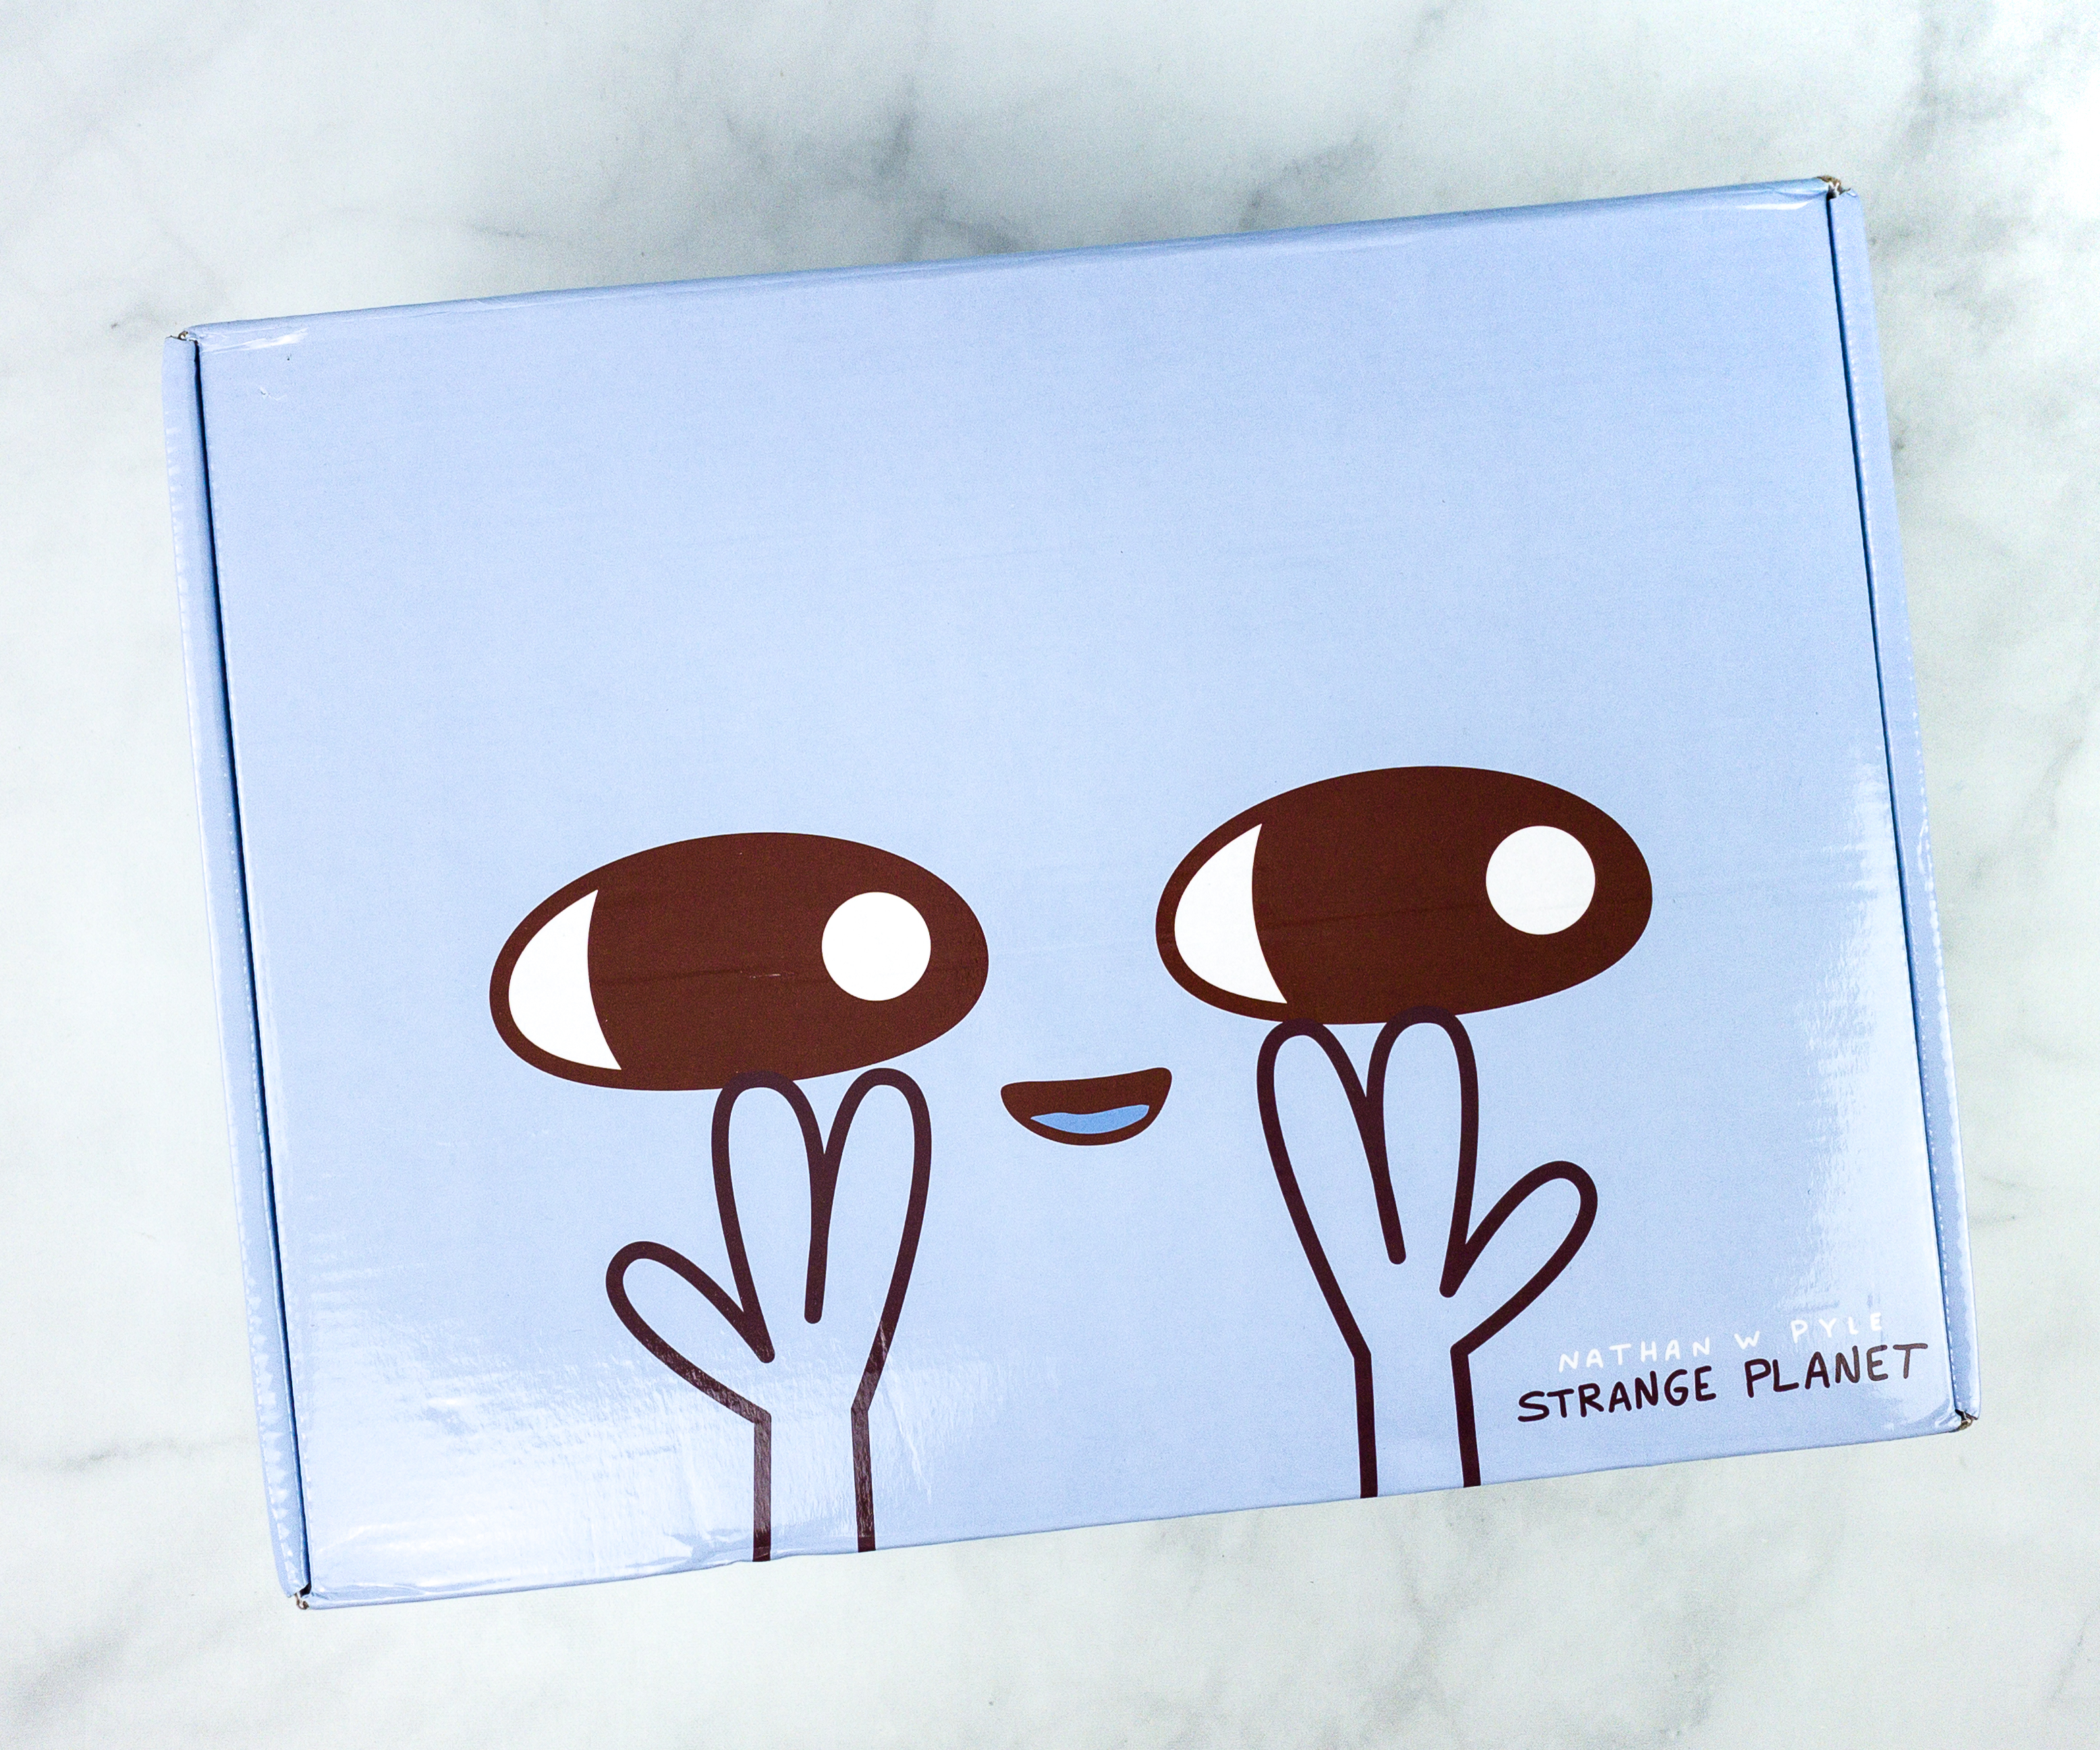 STRANGE PLANET SPECIAL PRODUCT: AND YET Women's Socks, Nathan W Pyle Shop